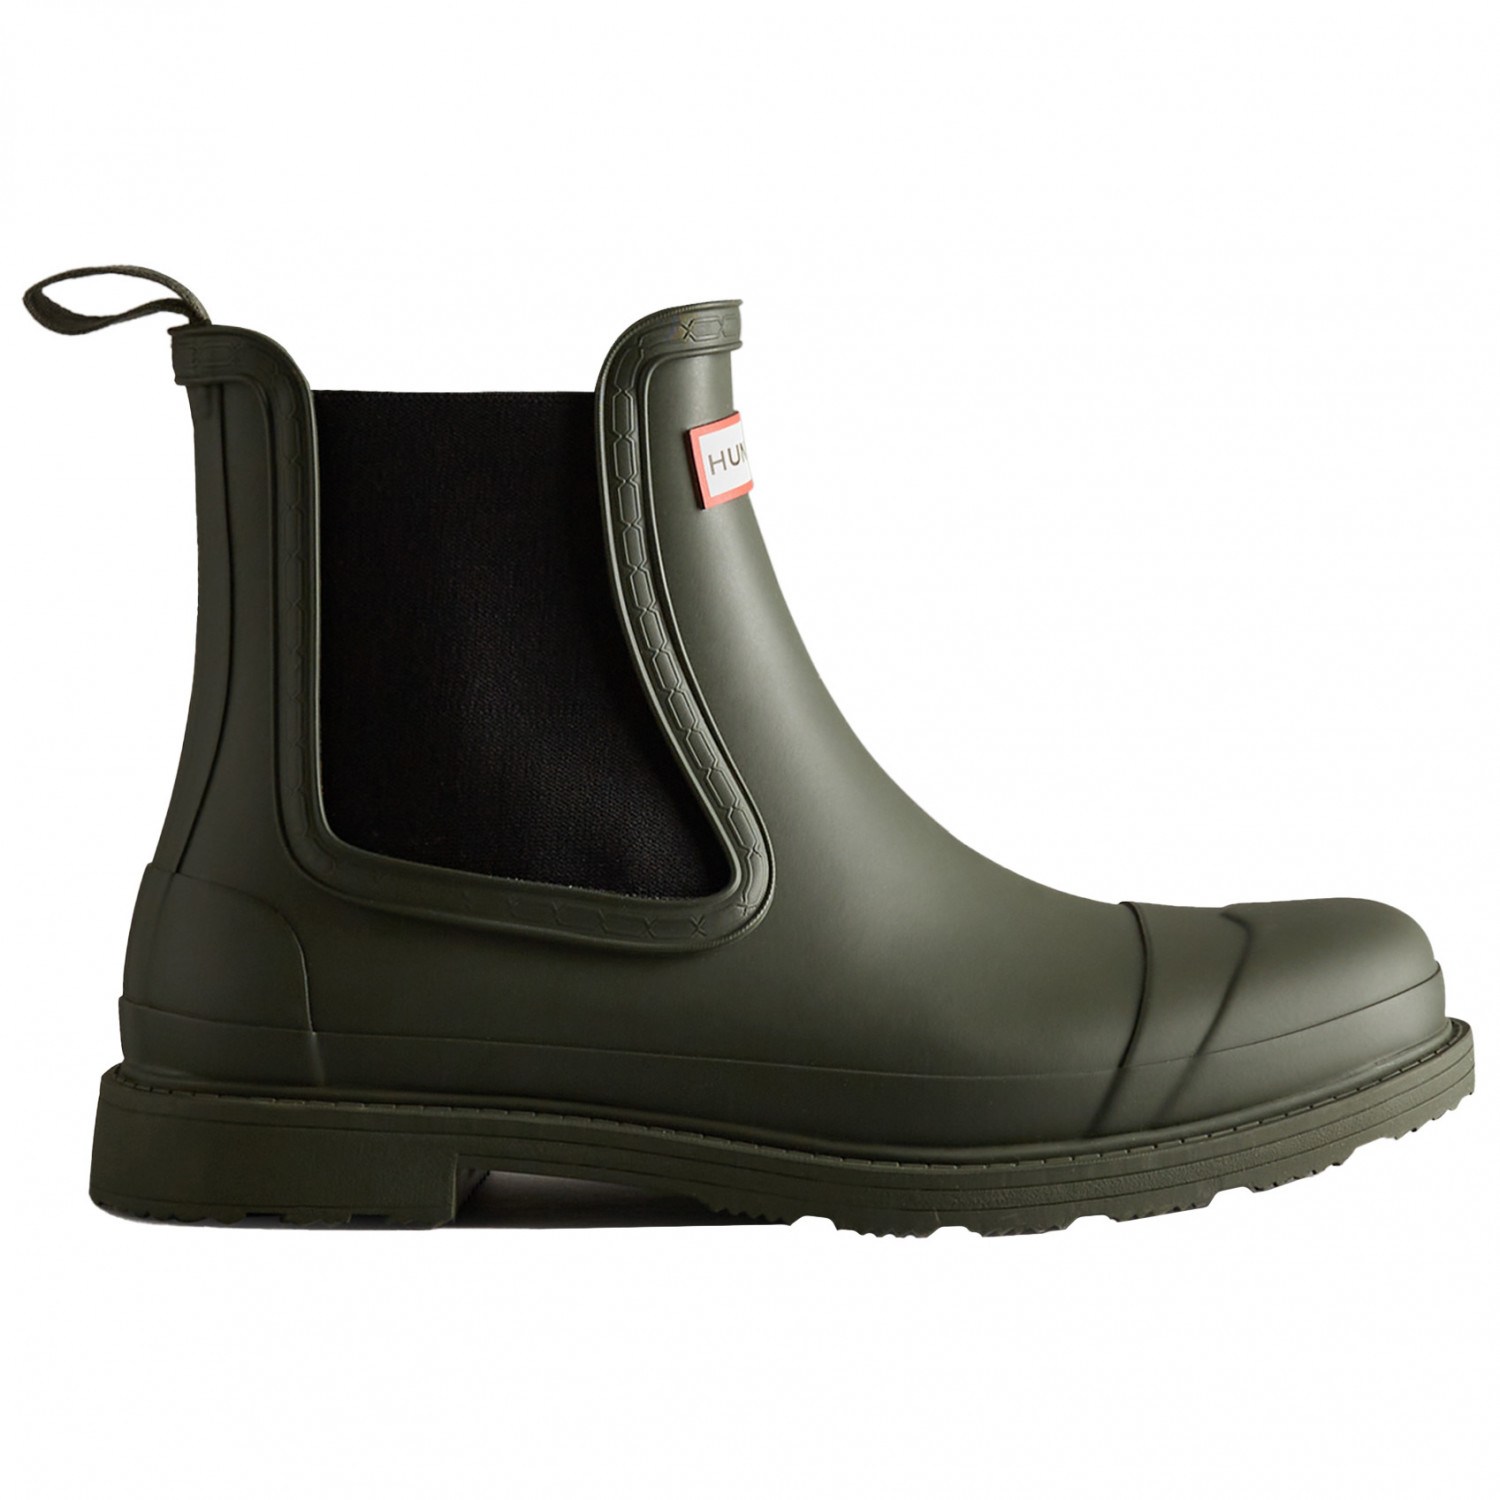 Резиновые сапоги Hunter Boots Commando Chelsea Boot, цвет Dark Olive fashion kids winter boot martin boots for girls and boys black shoes casual boots children motorcycle boots solid kids boot